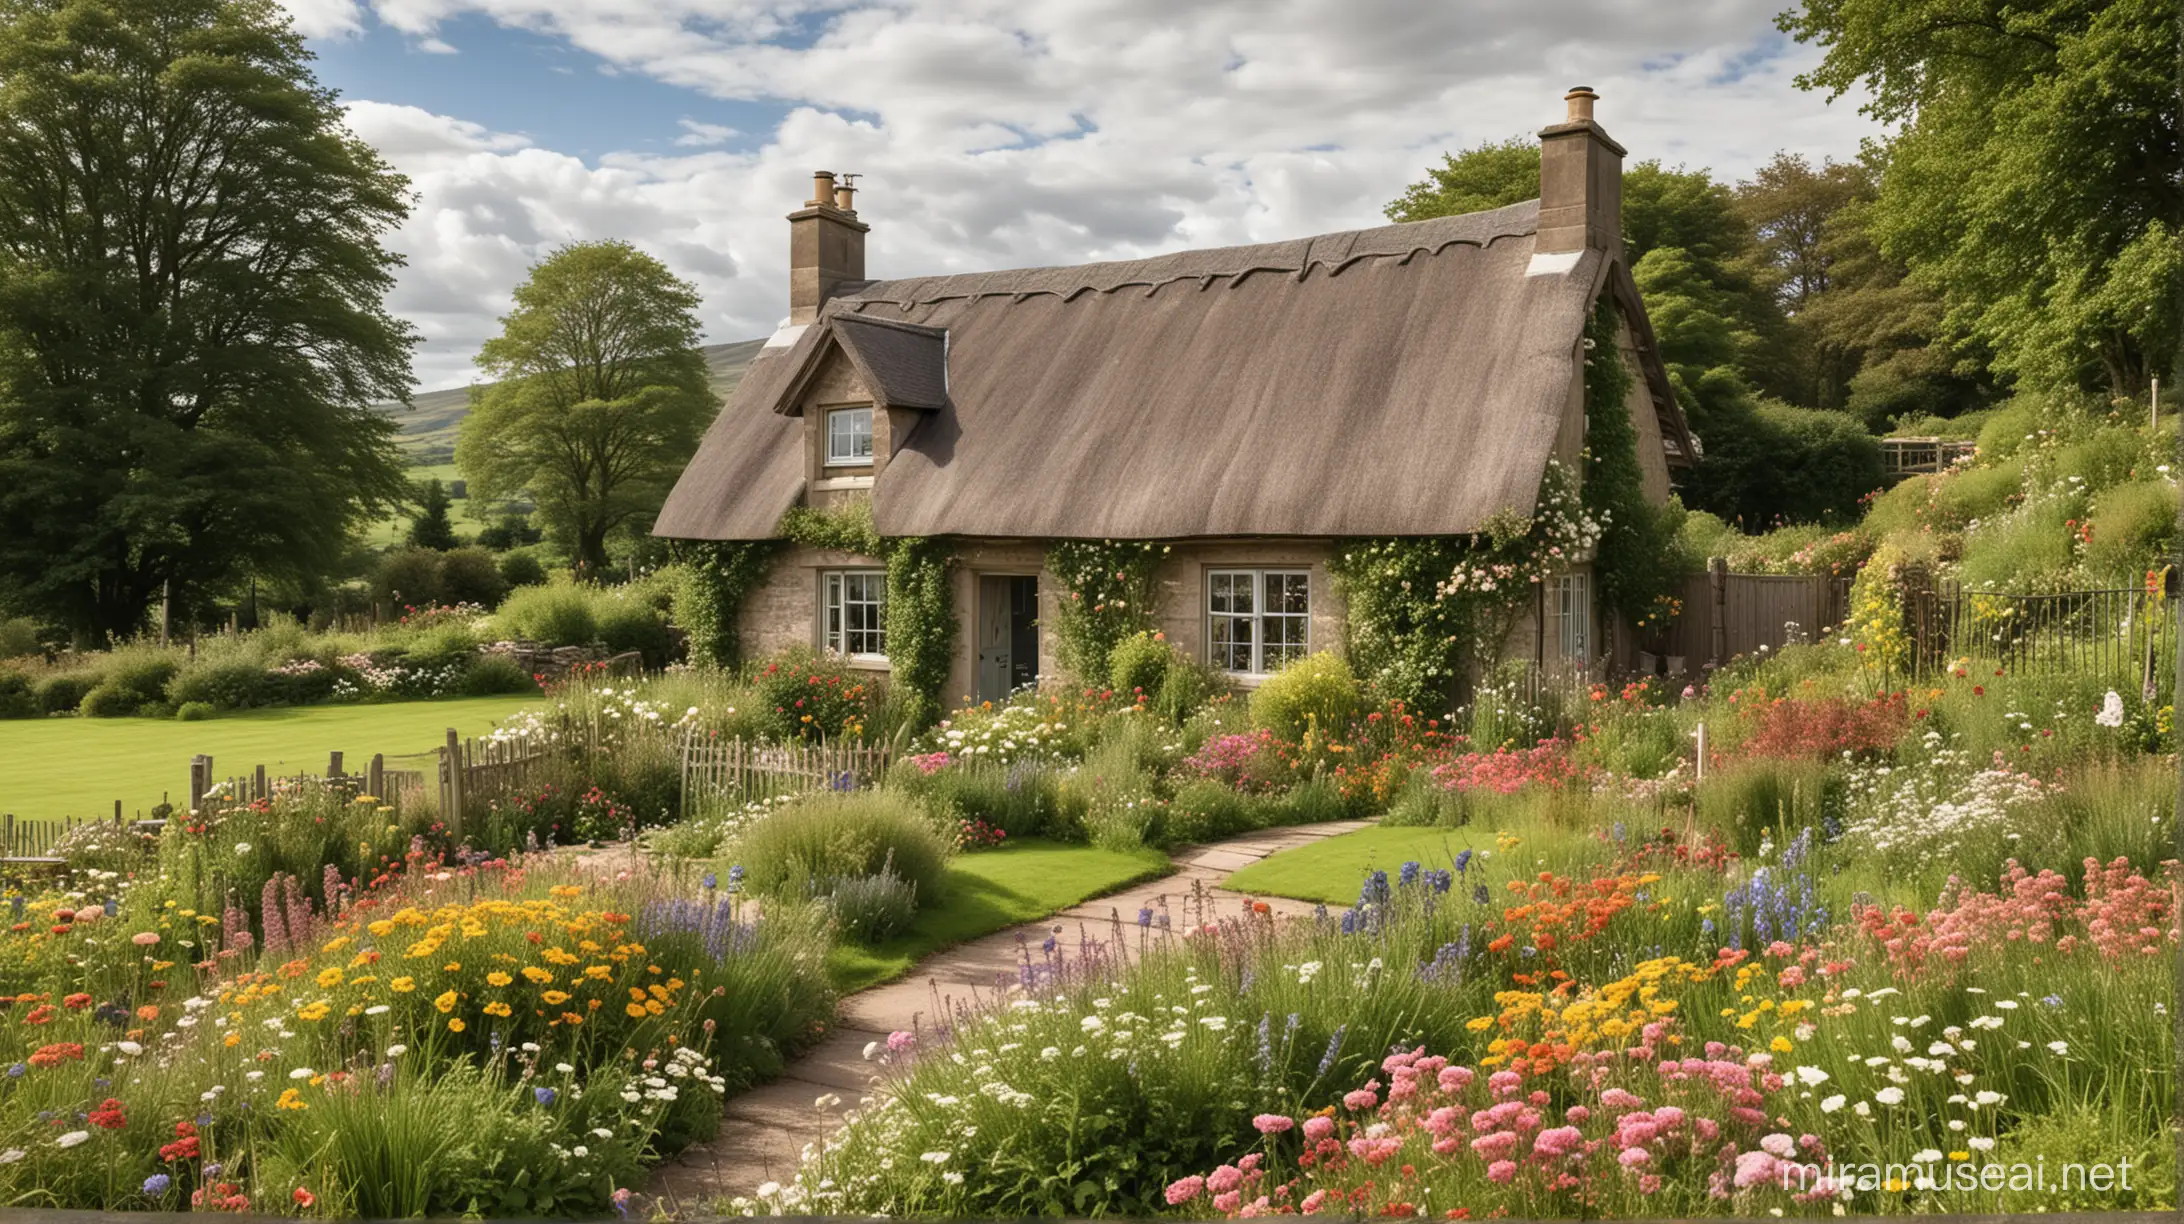 scottish cottage, covered in flowers, with a view of a field and a beautiful garden, pastoral and picturesque, with soft light